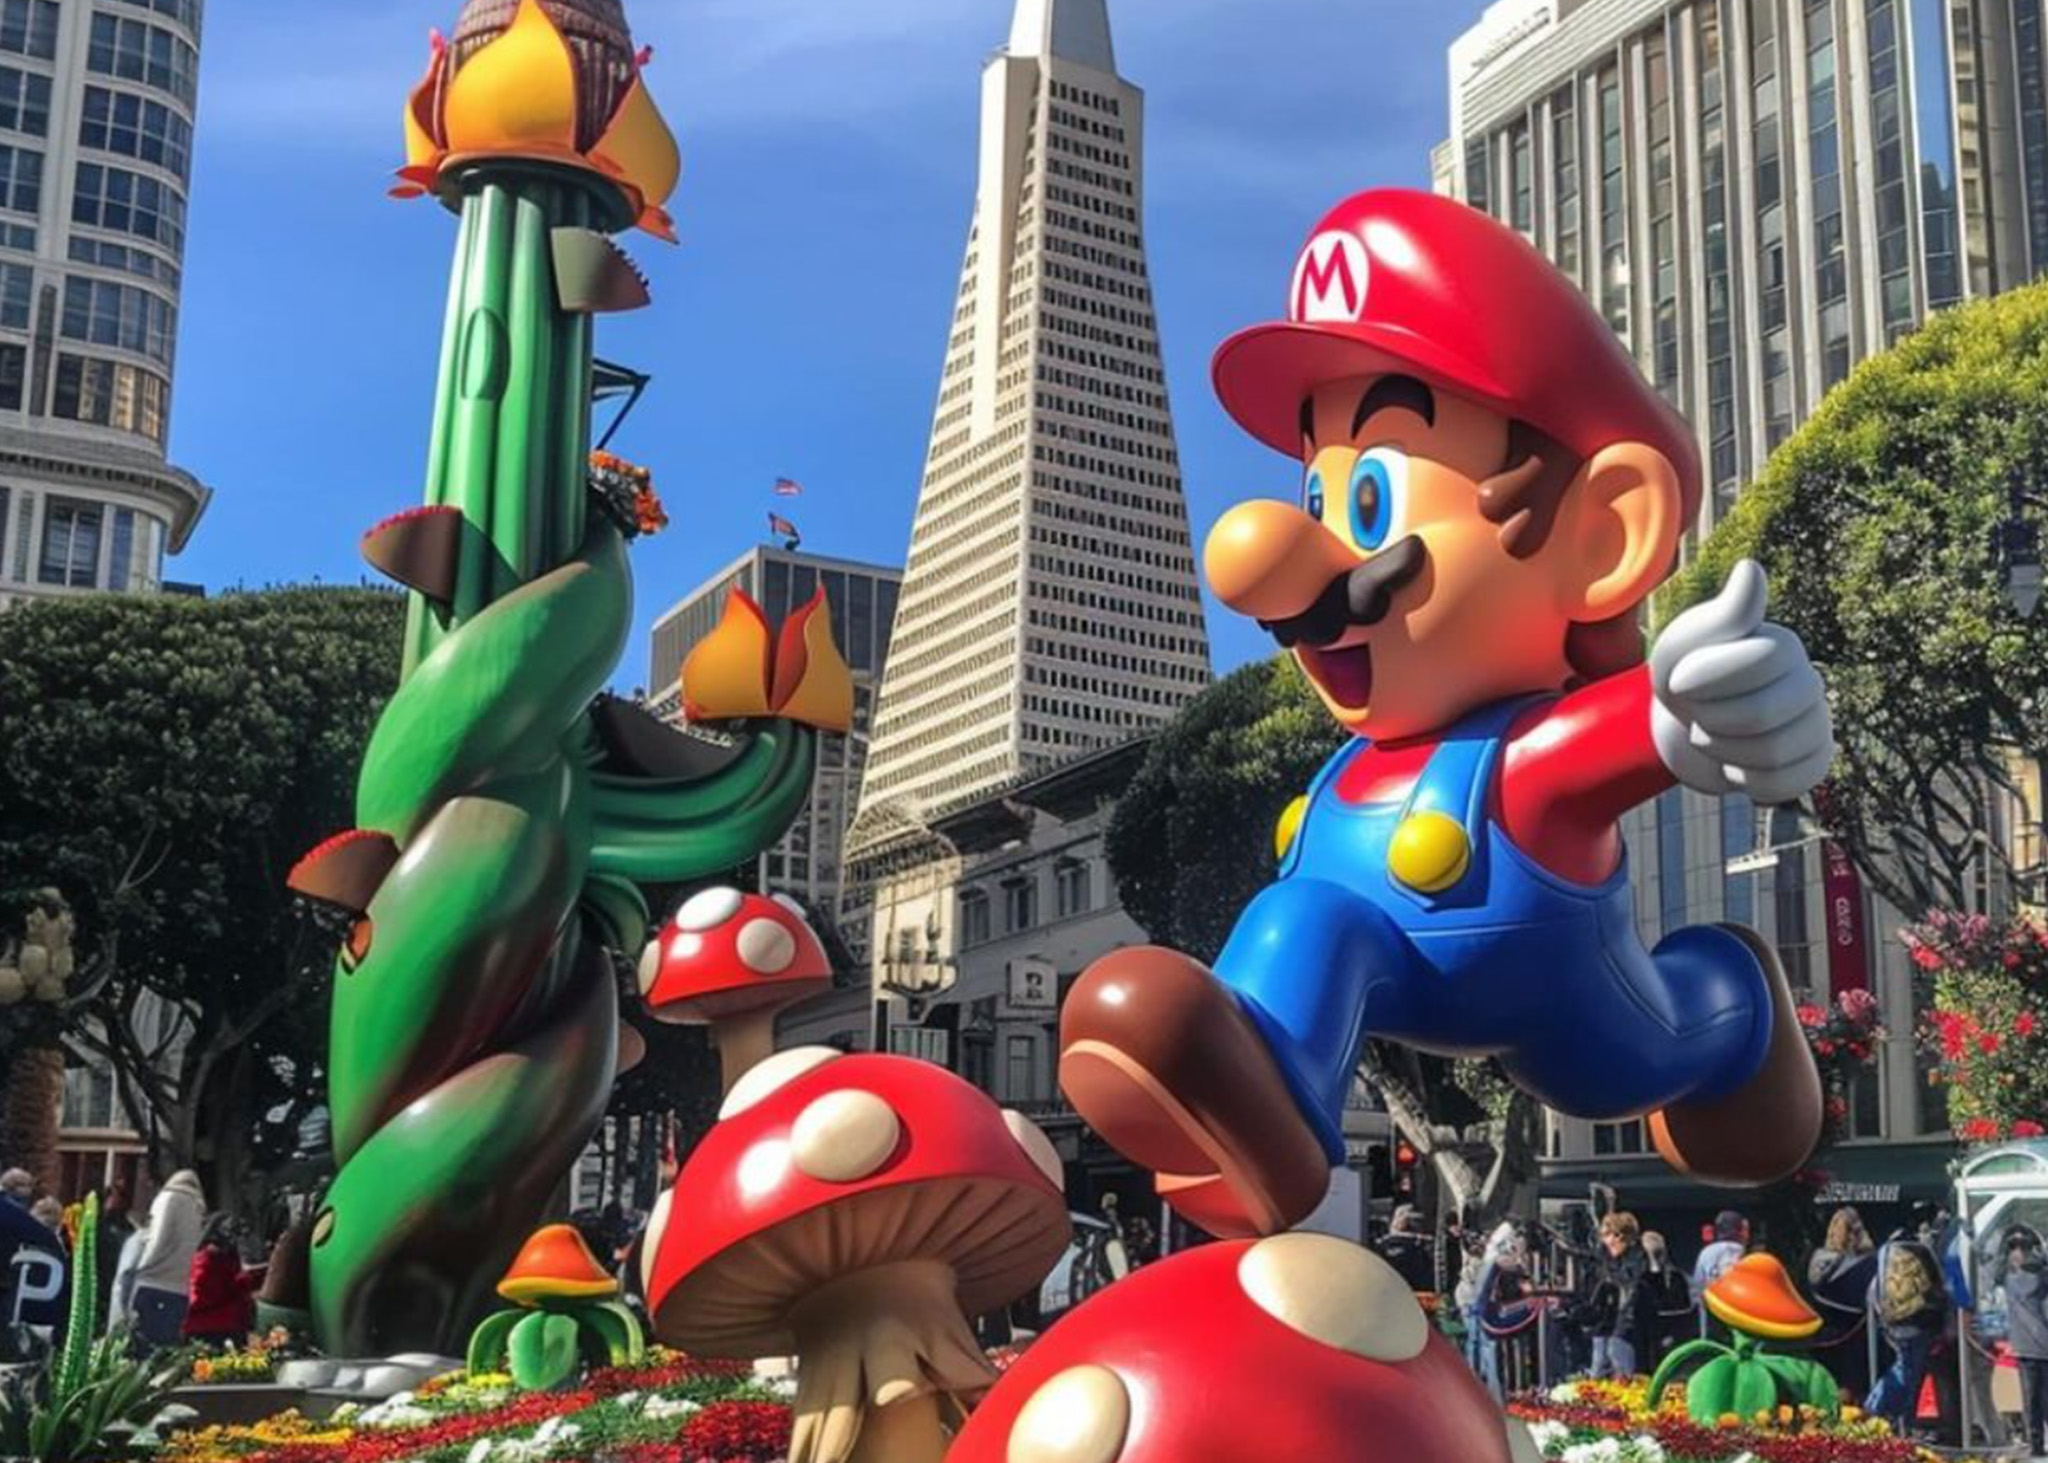 The image shows a large statue of a video game character dressed in red and blue, leaping with a thumbs up gesture, surrounded by oversized mushrooms and a green, twisting vine.